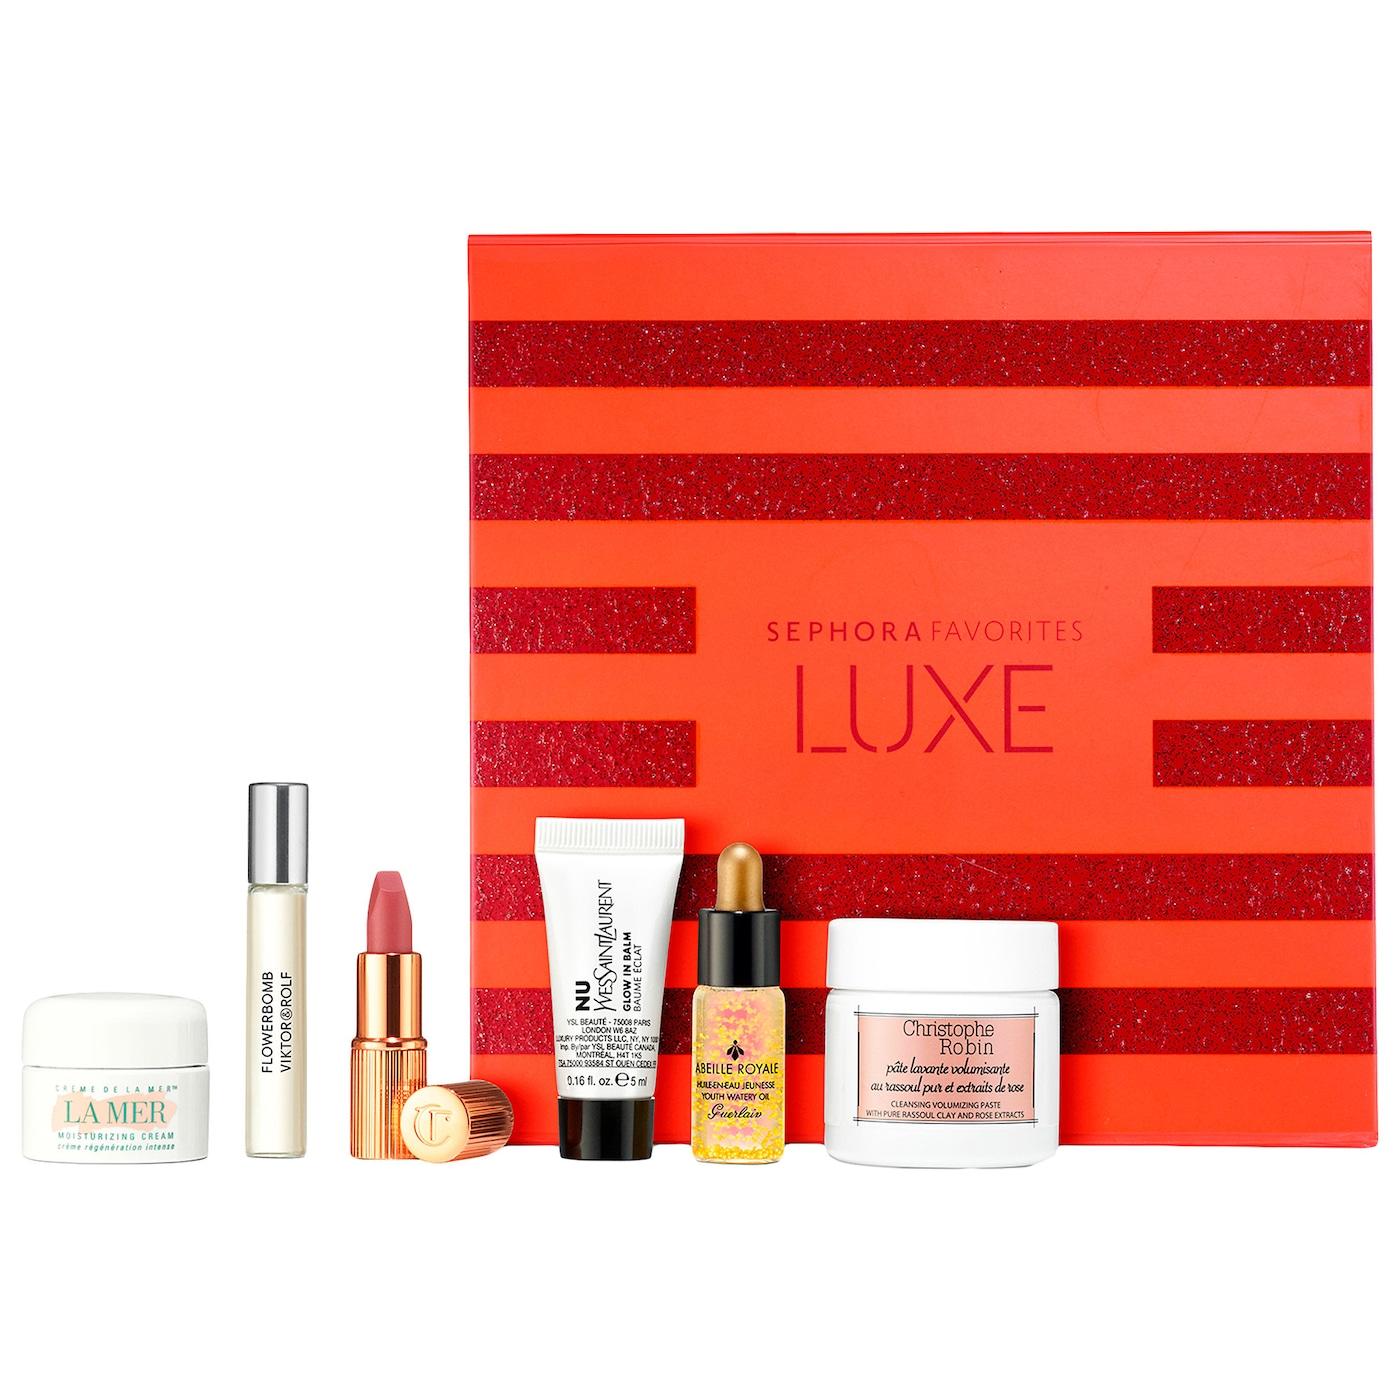 New Sephora Favorites LUXE—The Wish List Collection – Coming Soon